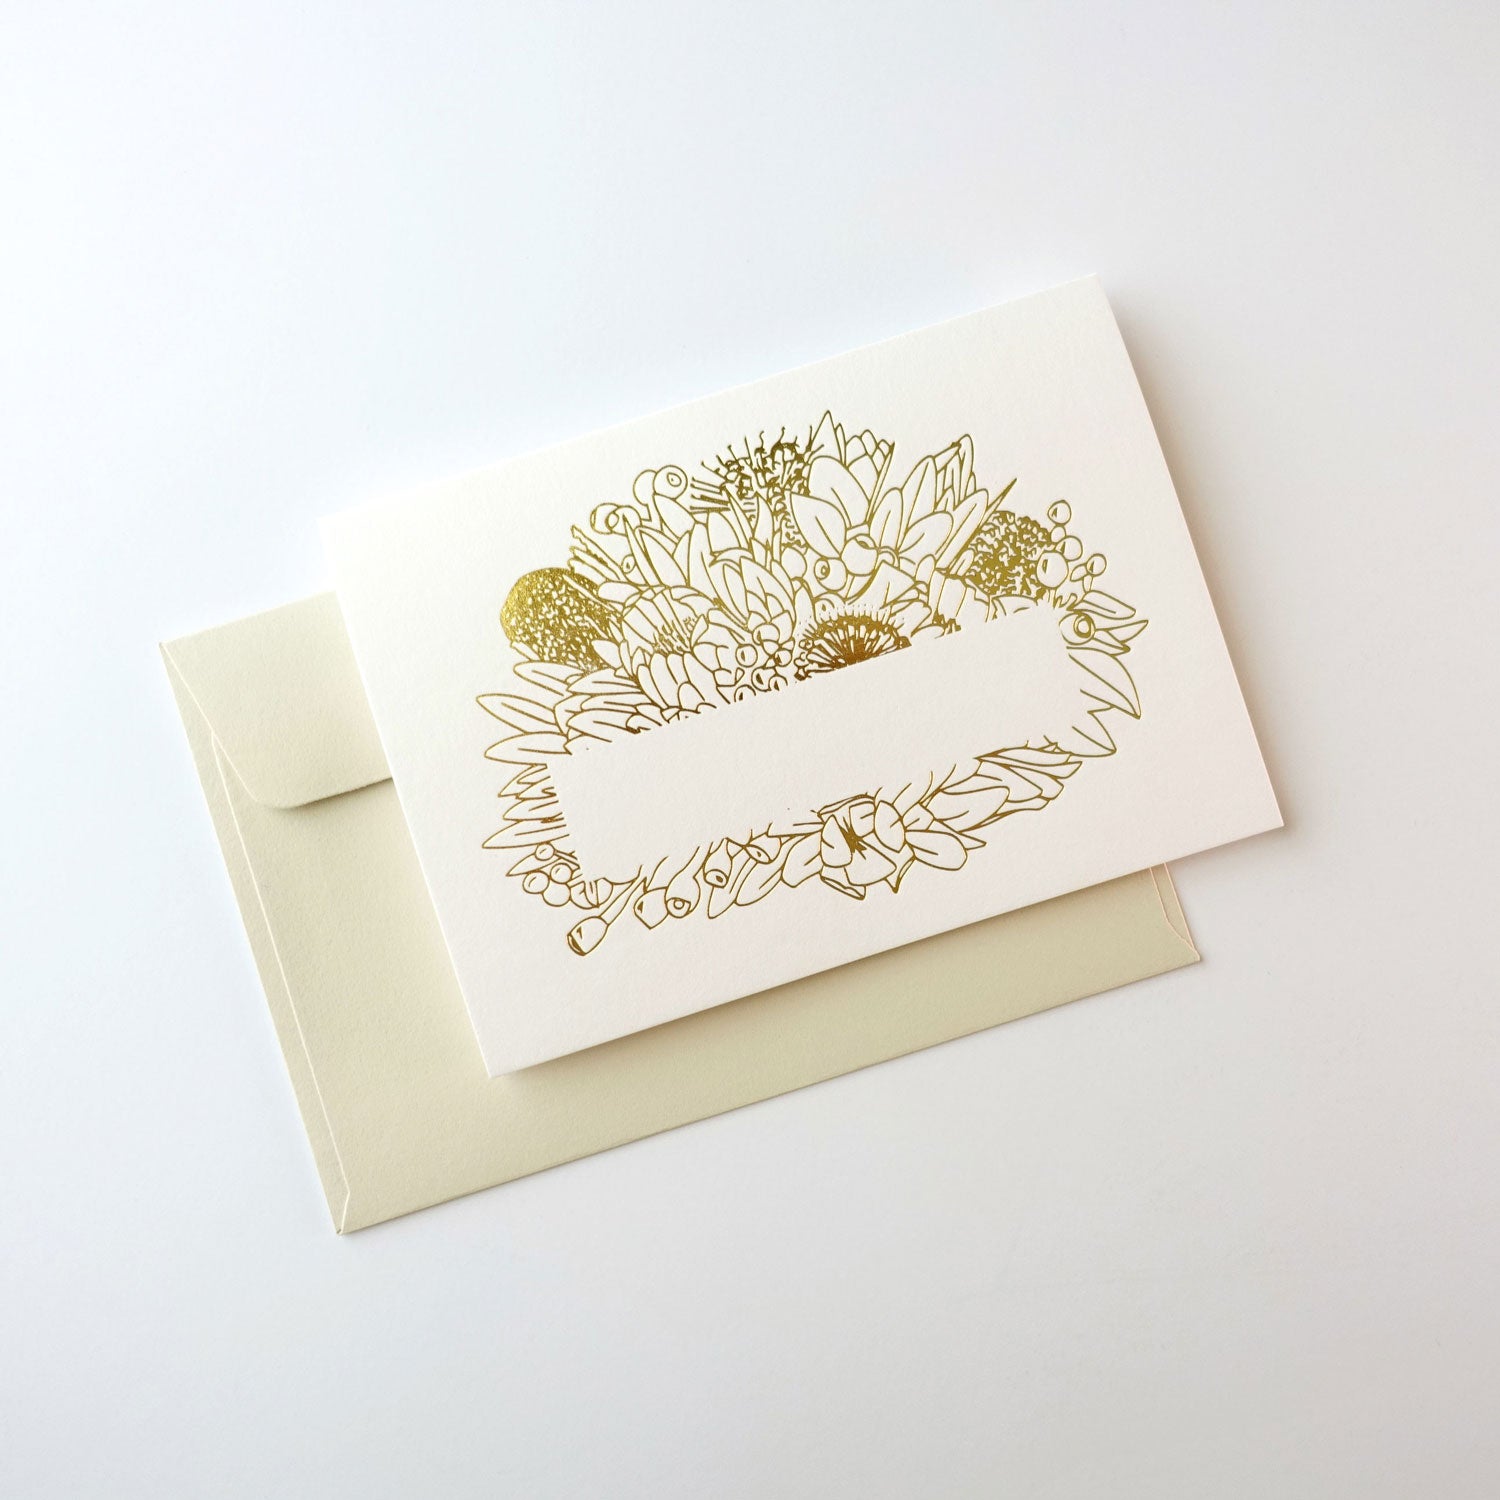 Gold foil stamped greeting card of Australian native florals